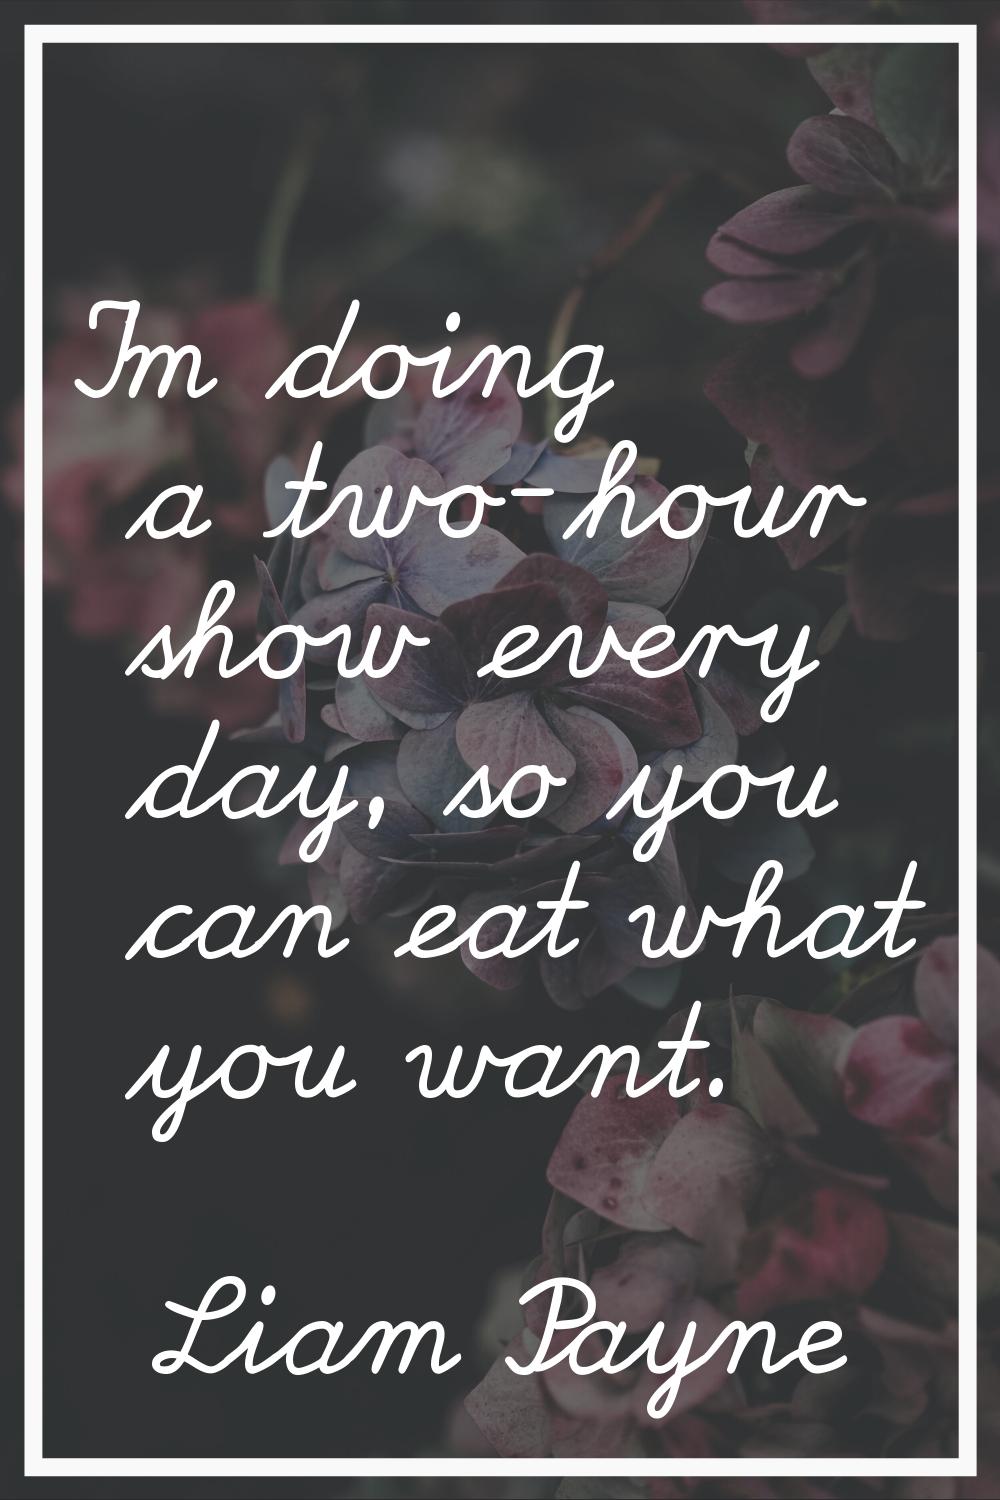 I'm doing a two-hour show every day, so you can eat what you want.